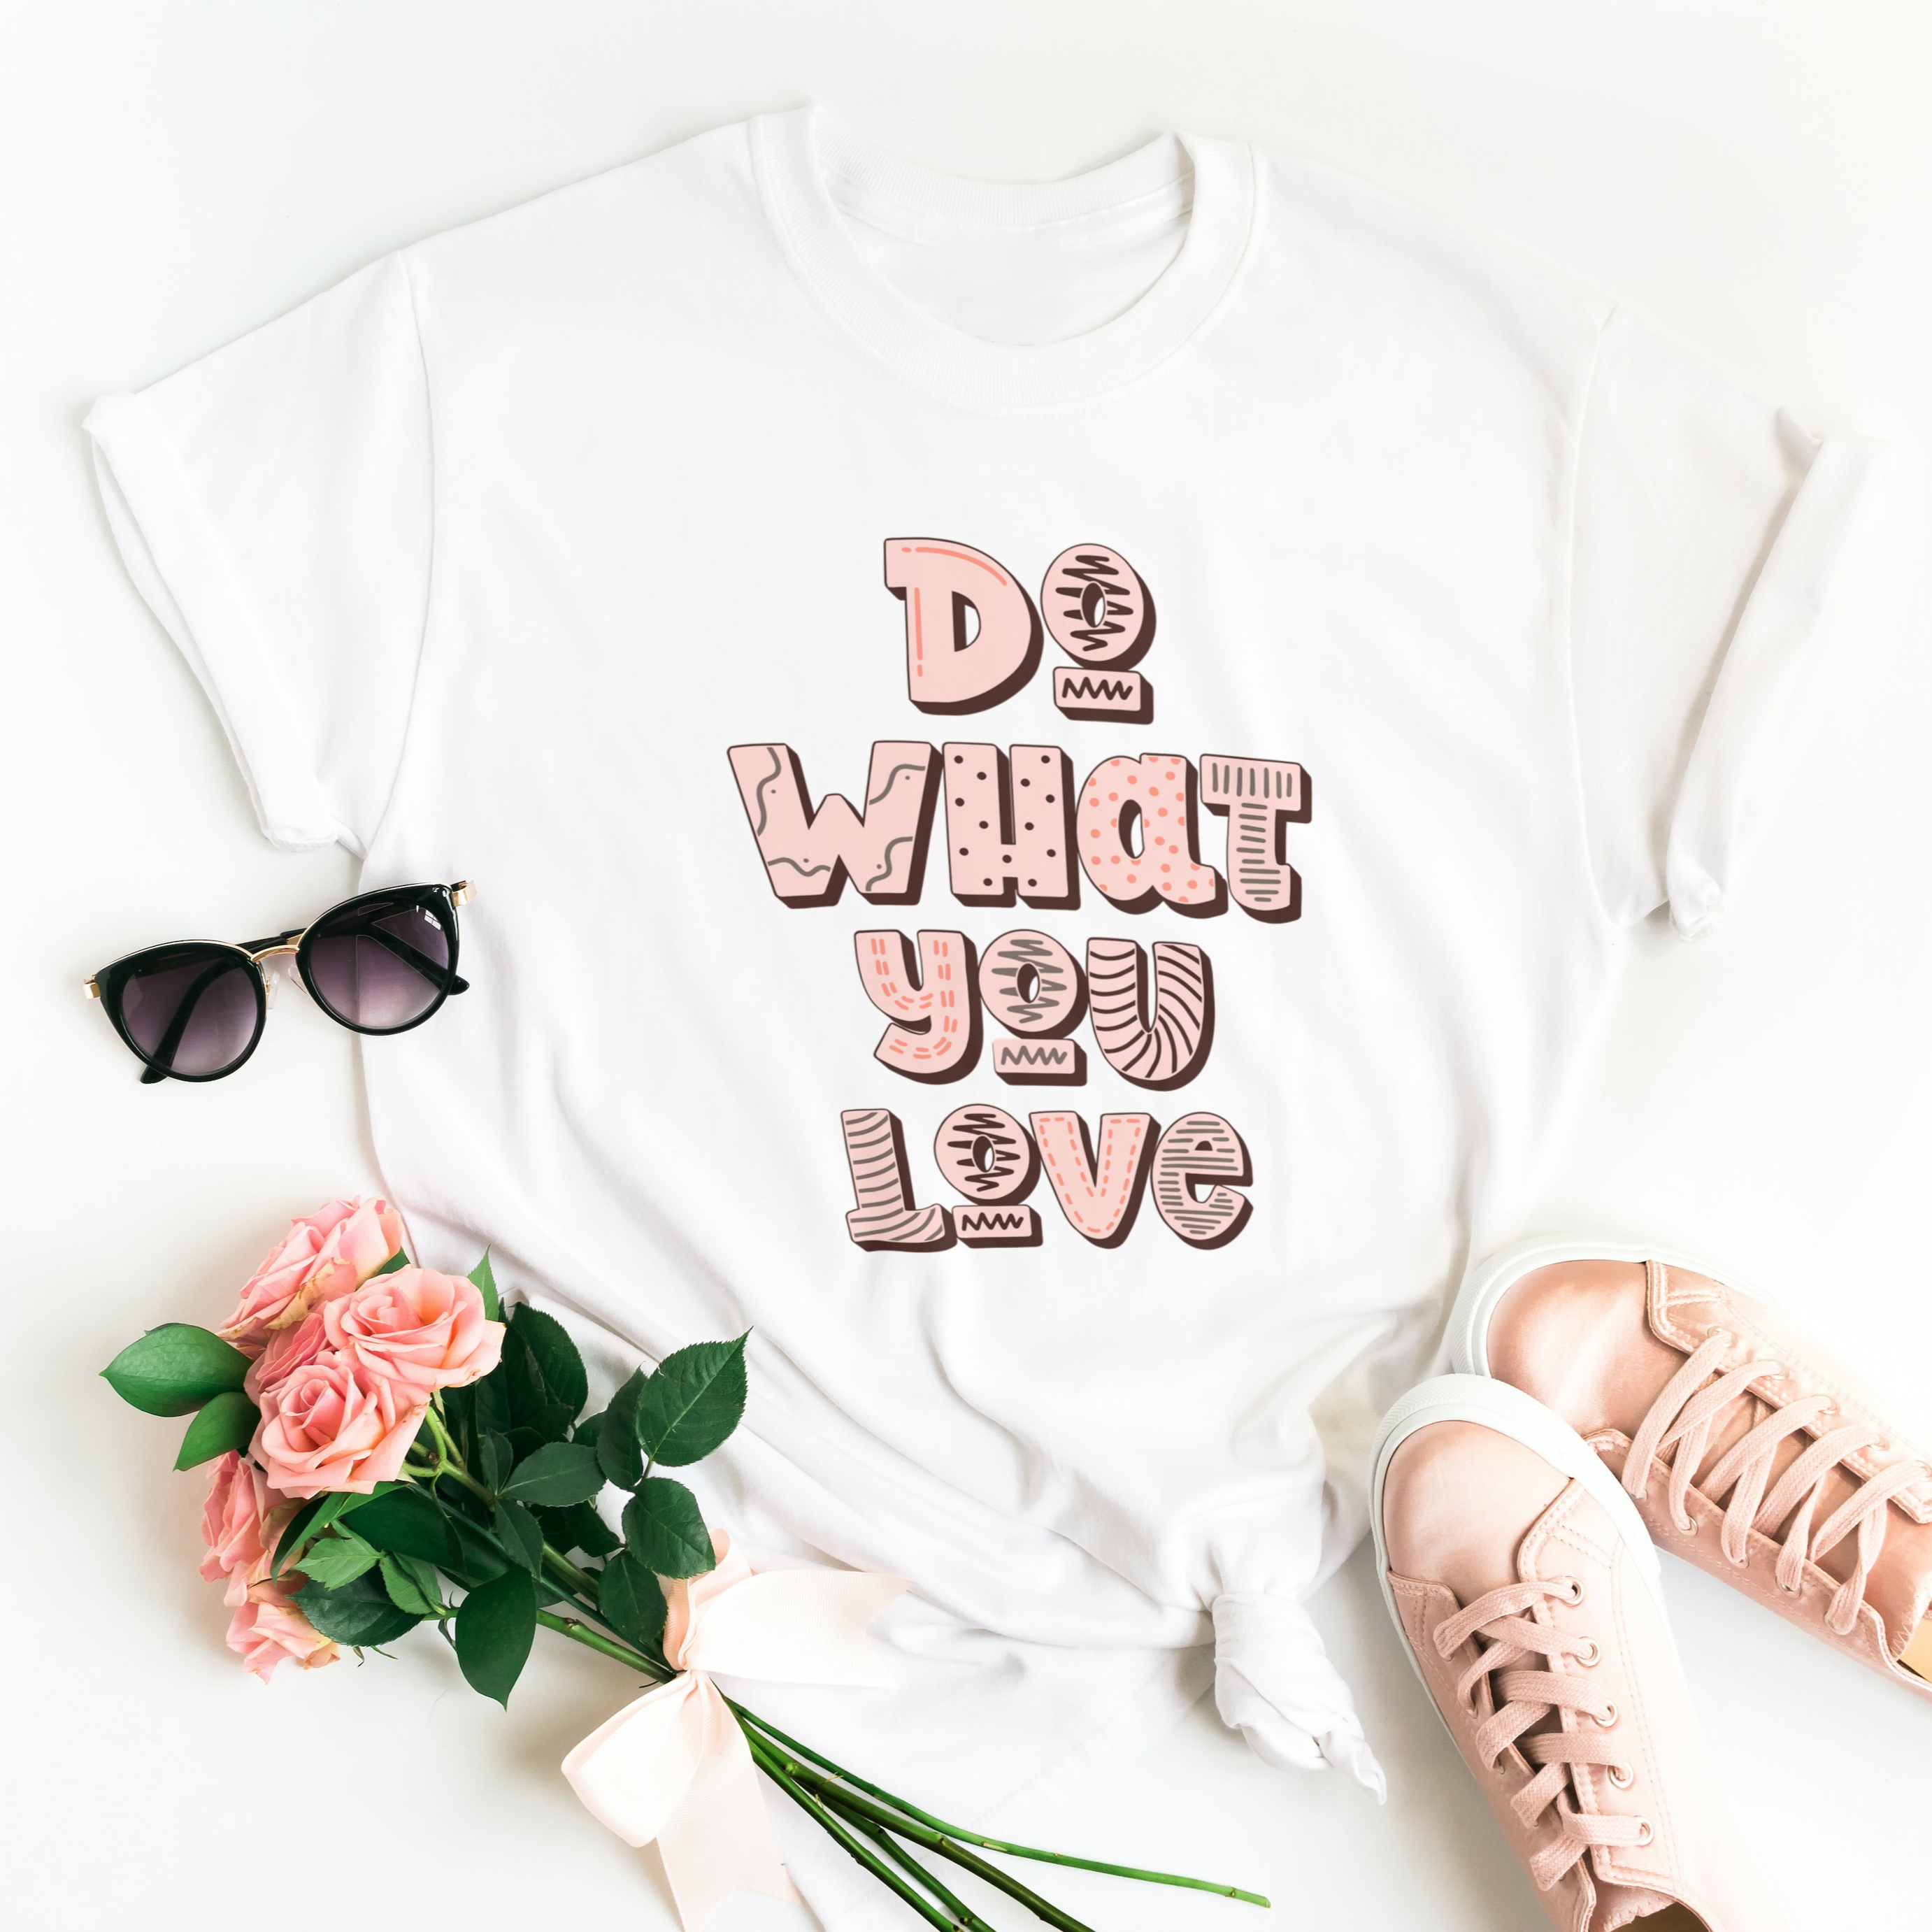 Story of Awakening Lifestyle Community Spirituality Relationships Love Light Meditation Oneness Earth Balance Healing Shop Store Charity Tree Nature Read Write T shirt Tops Tees Clothing Women Horoscope Organic Cotton Do What You Love Quote